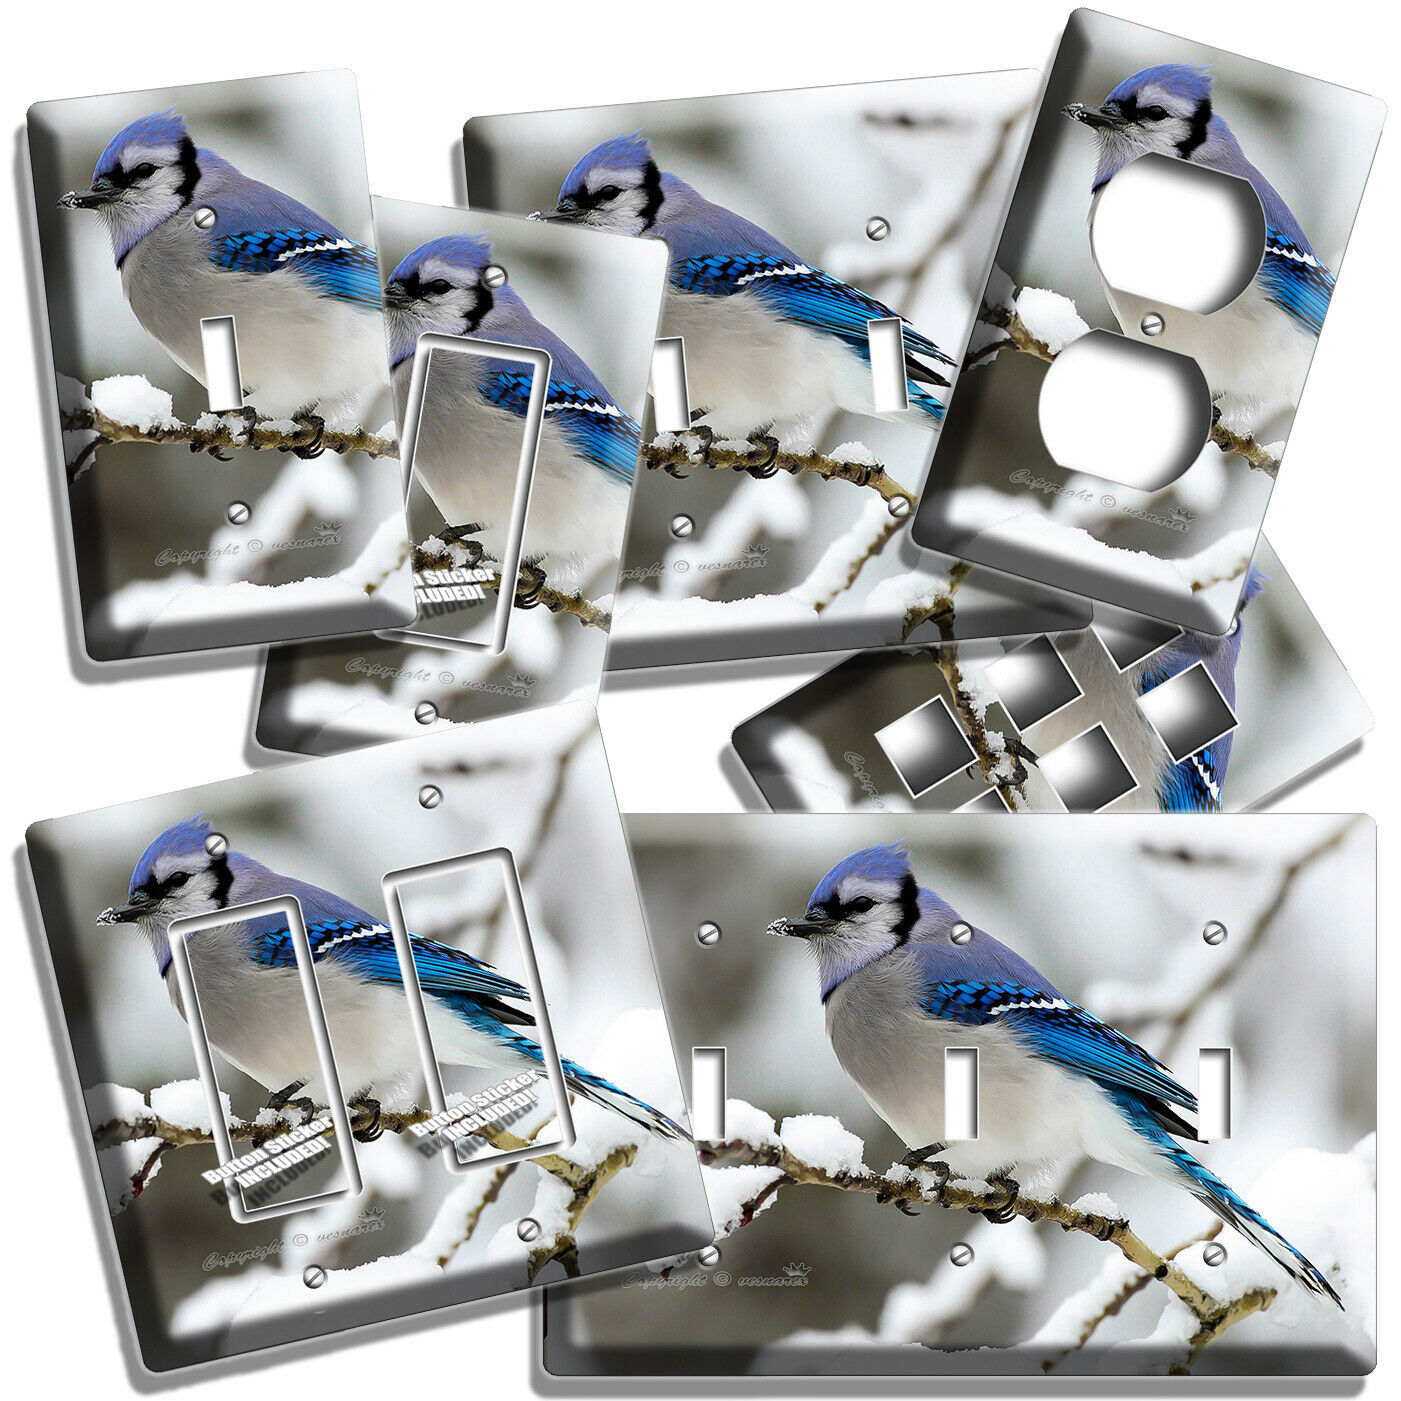 BLUE JAY BIRD ON THE TREE WINTER SNOW LIGHT SWITCH OUTLET WALL PLATES ROOM DECOR